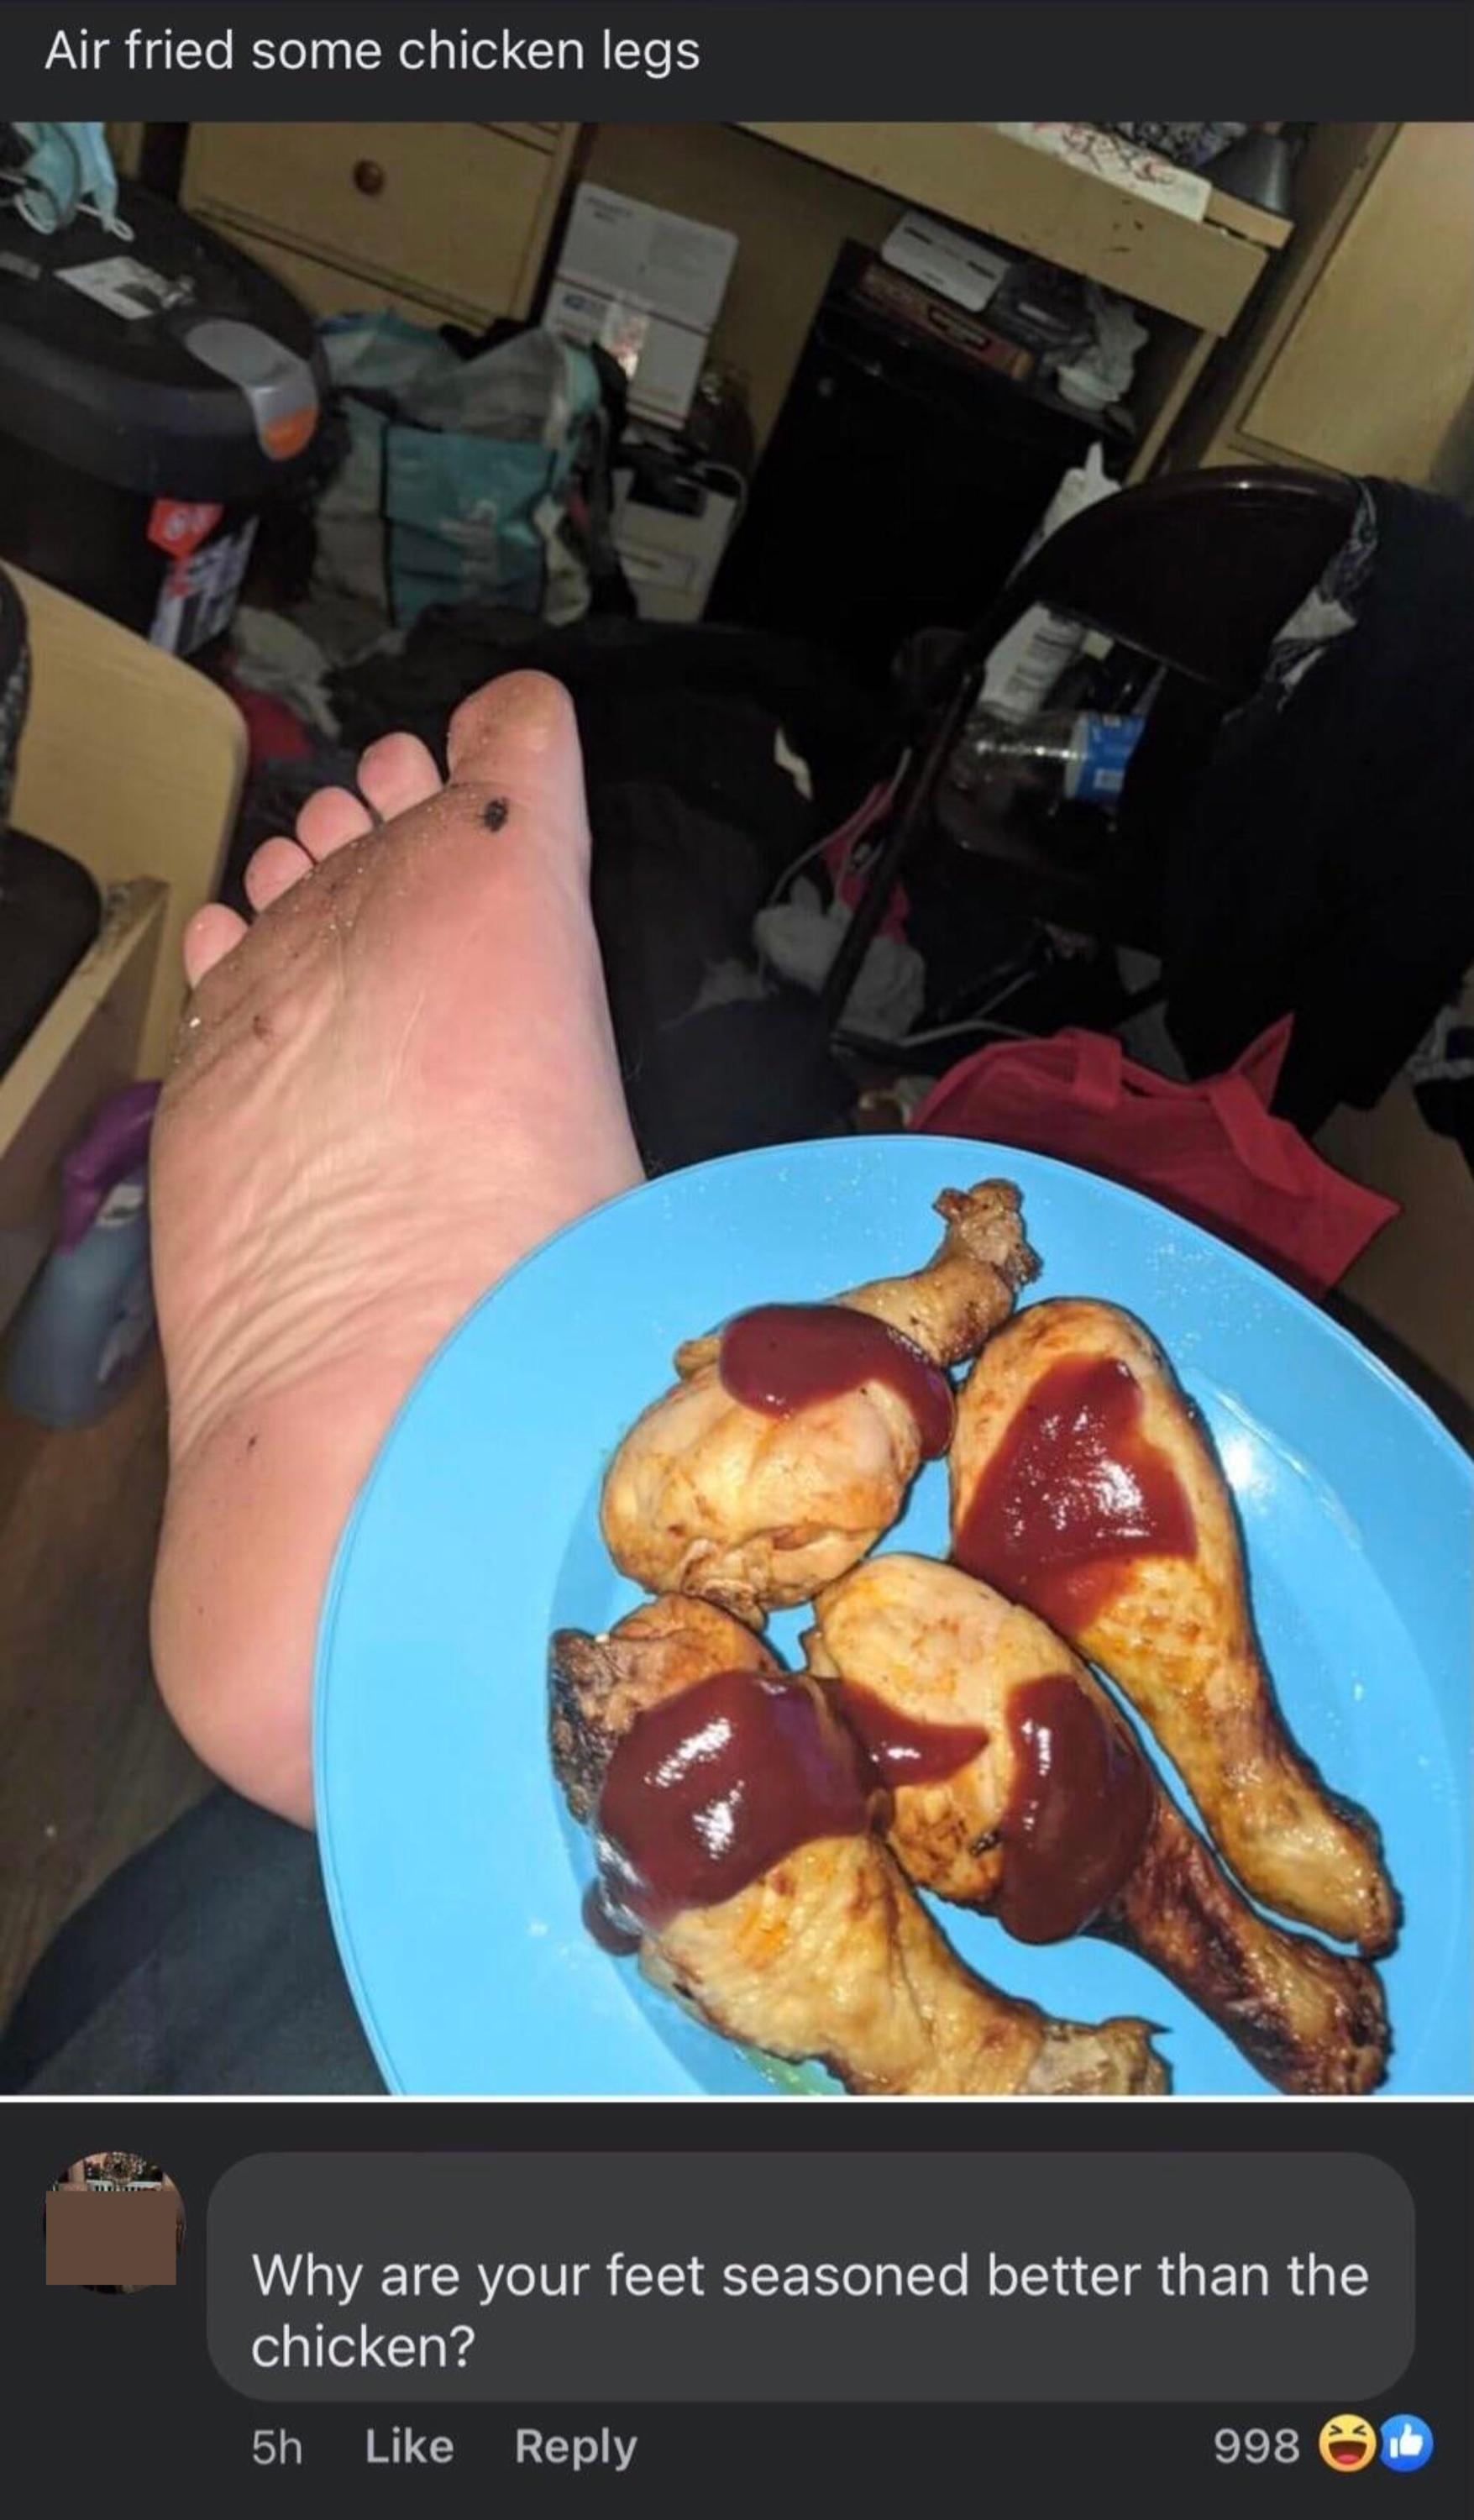 Person posts photo of chicken legs they air-fried, with plate propped on their leg and showing their bare foot, and someone responds, &quot;Why are your feet seasoned better than the chicken?&quot;